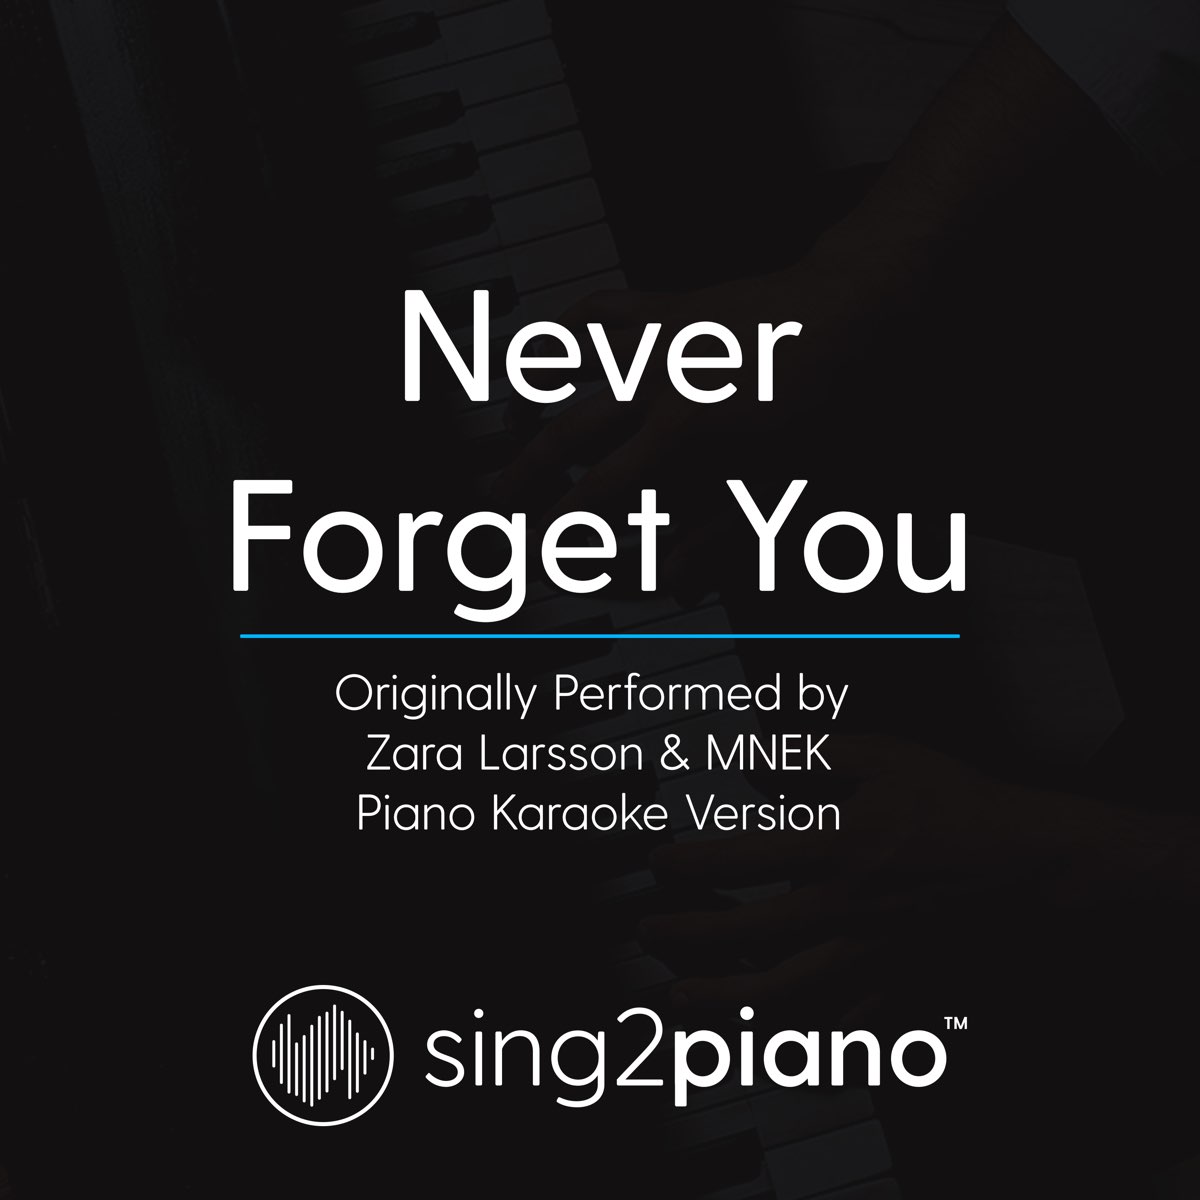 Never Forget You (Originally Performed by Zara Larsson & Mnek) [Piano  Karaoke Version] - Single by Sing2Piano on Apple Music